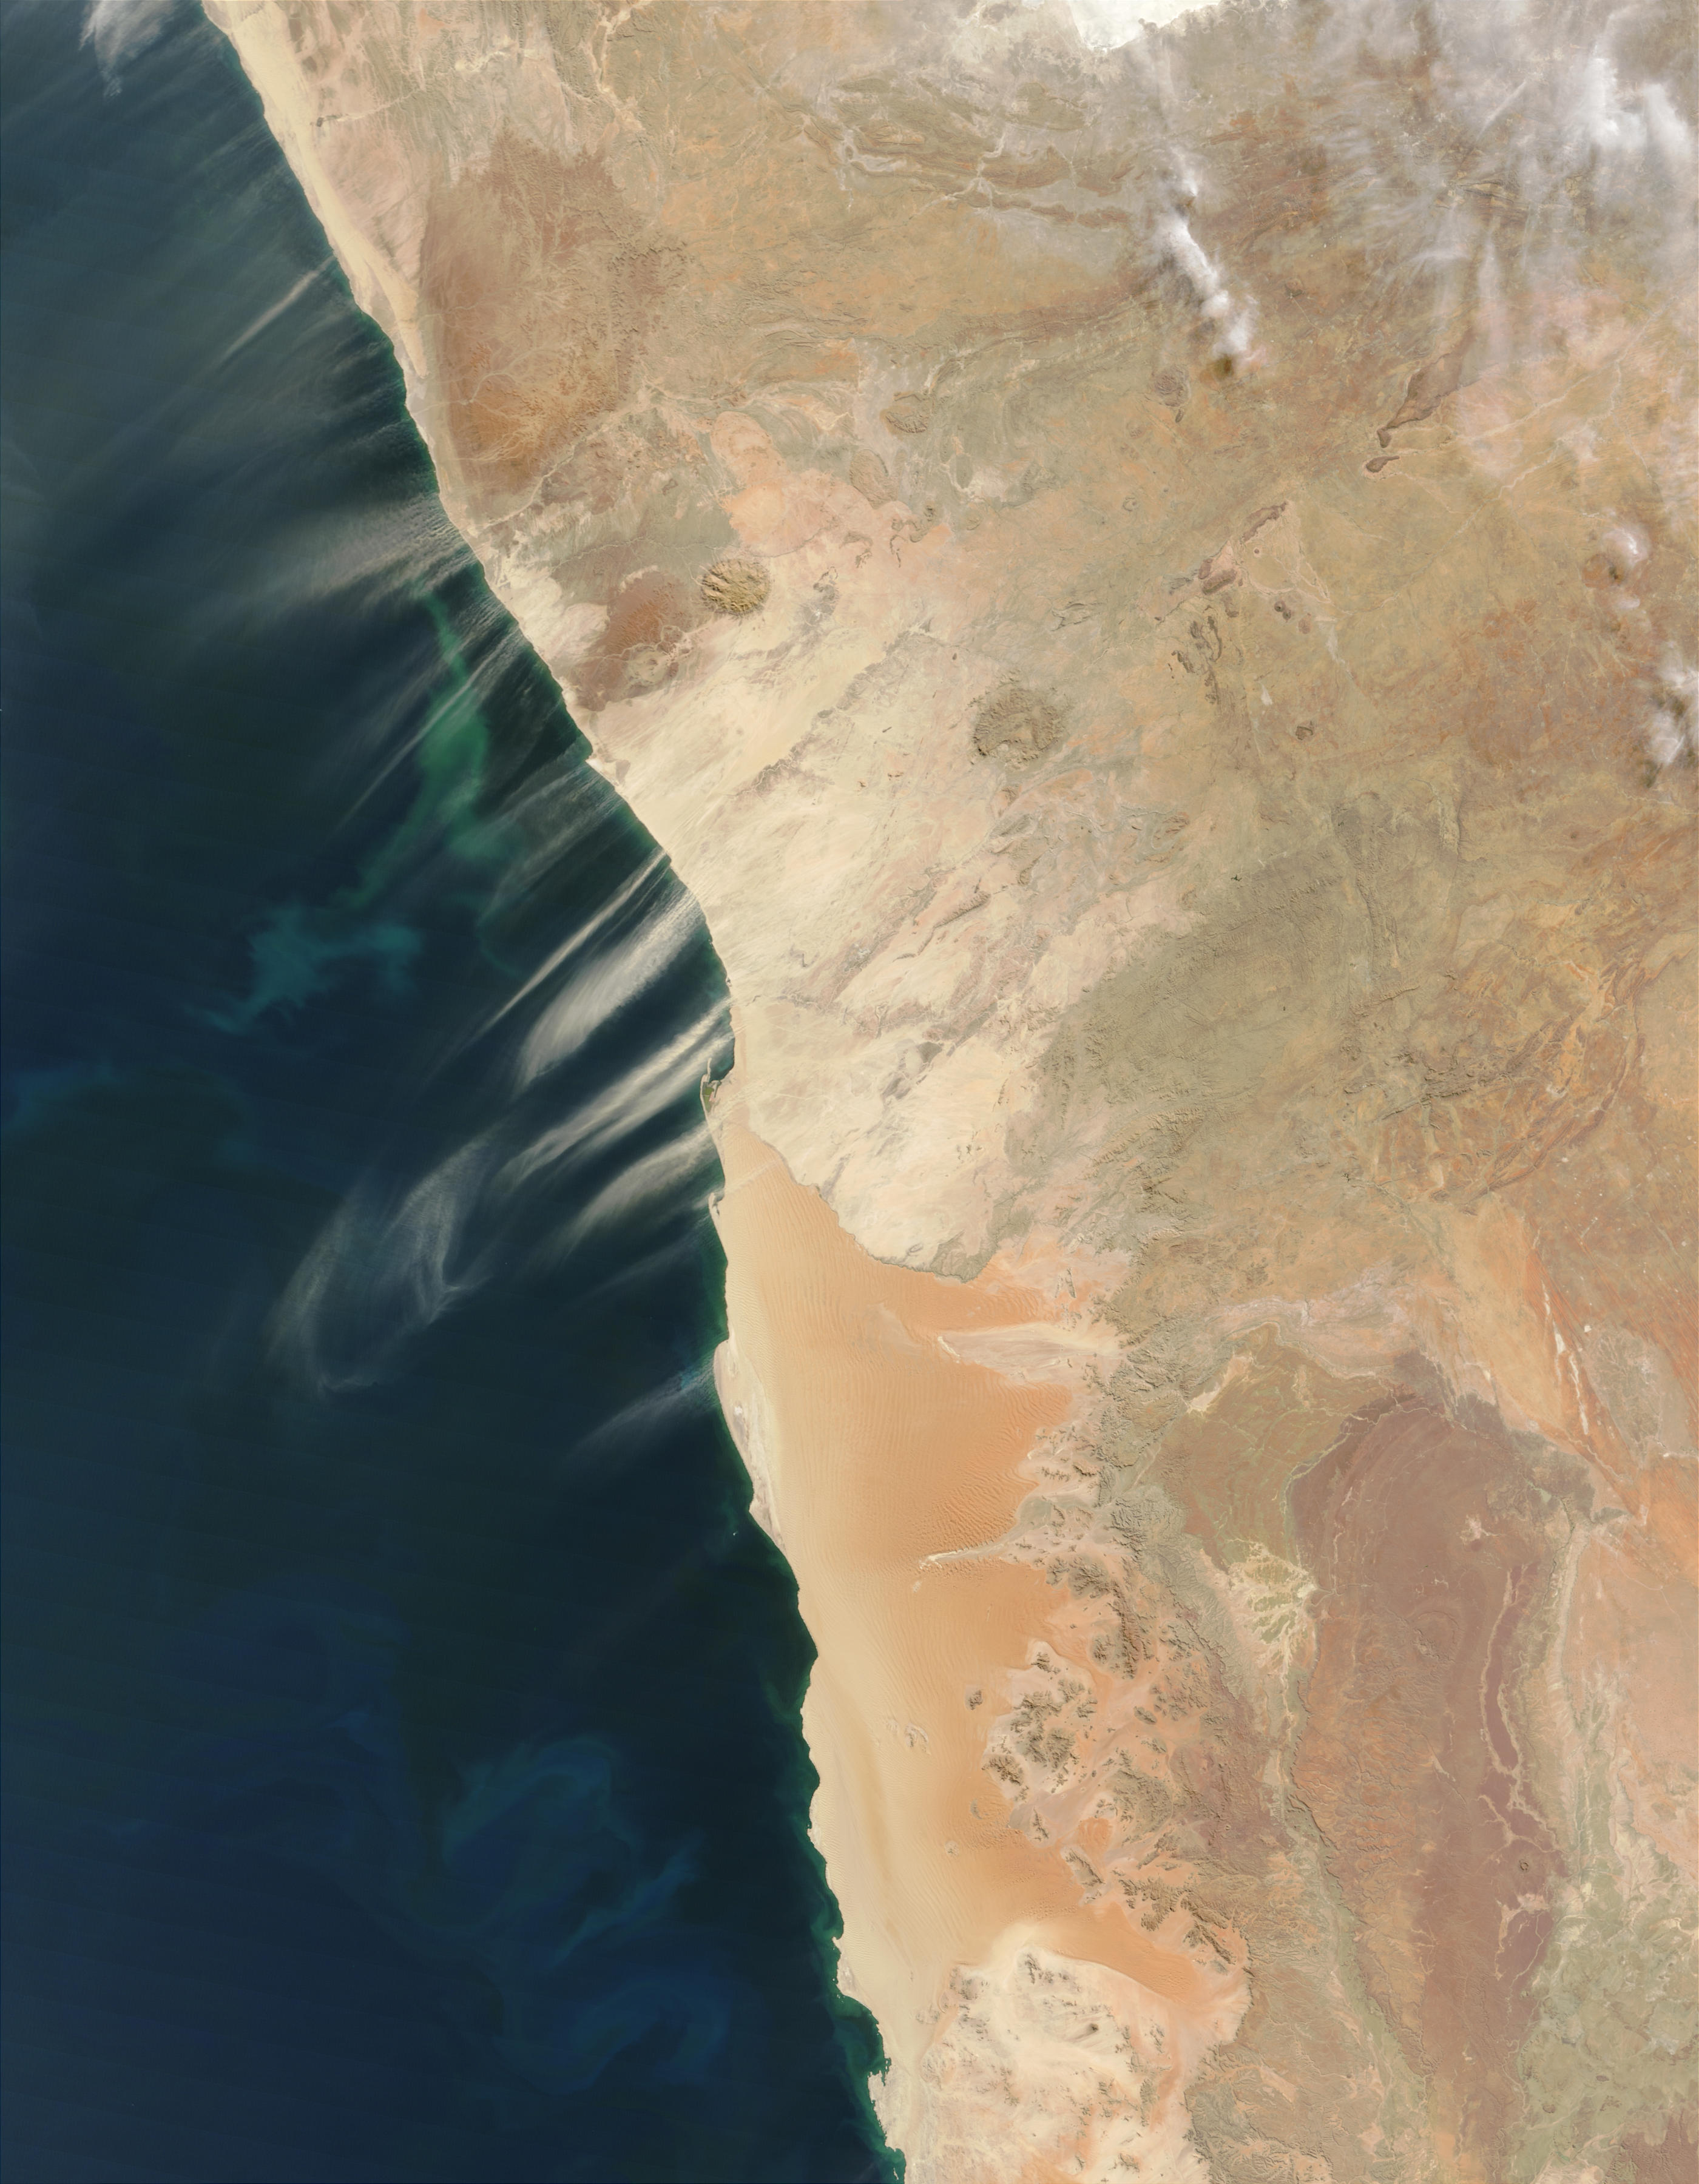 Dust plumes and phytoplankton bloom off Namibia - related image preview